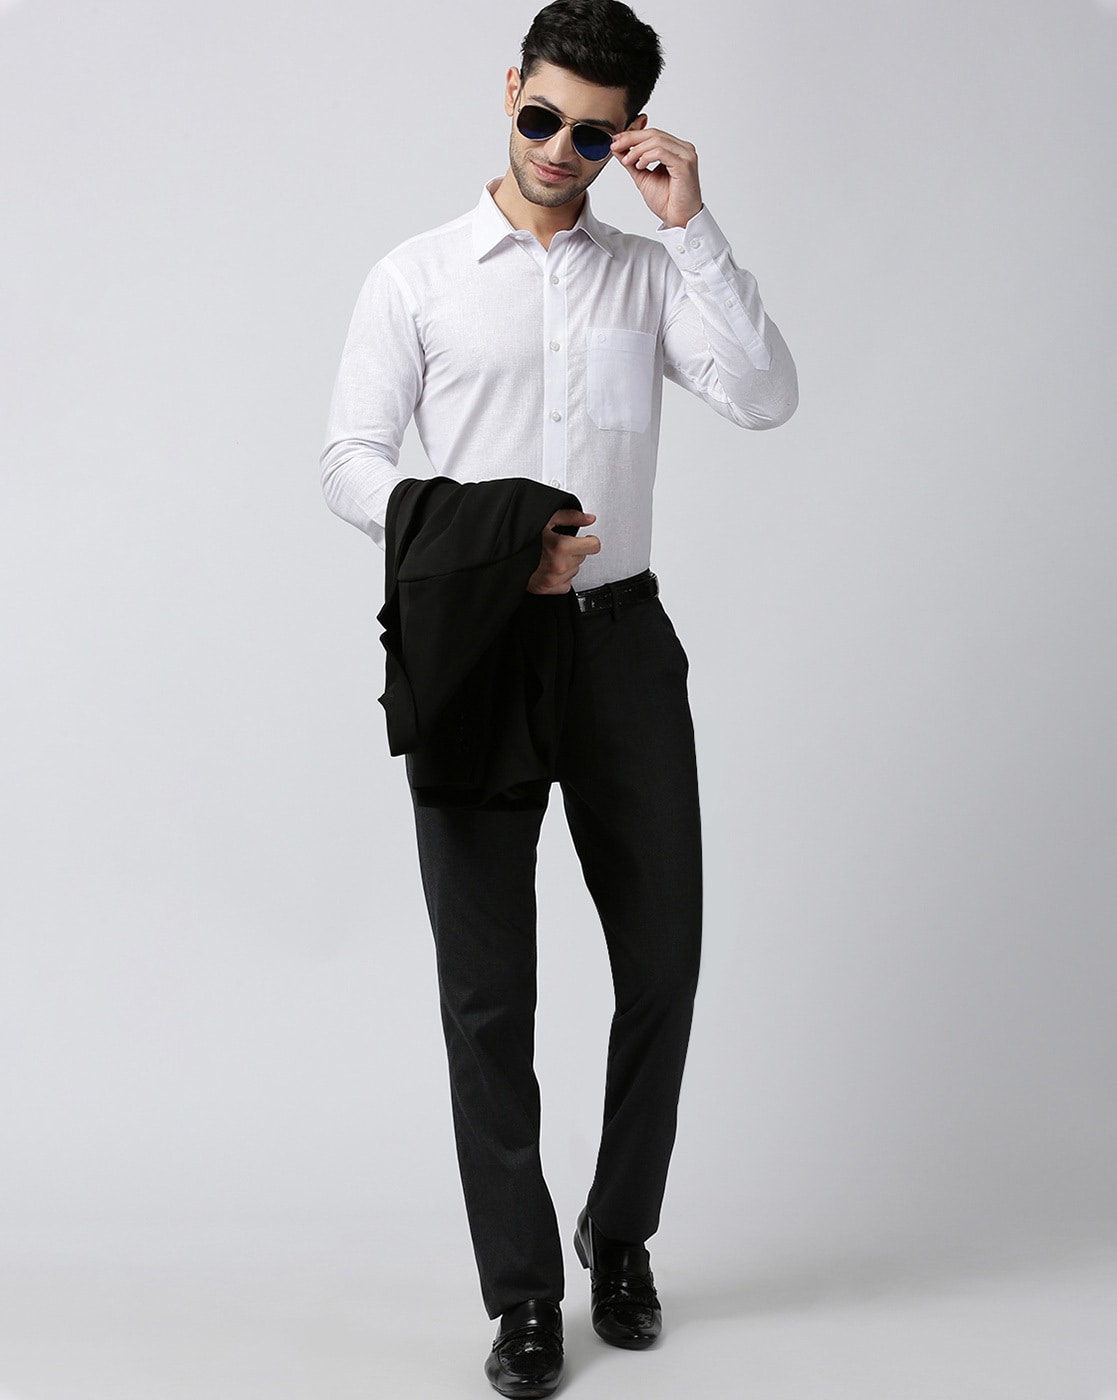 White Pants with Black Shirt Outfits For Men 115 ideas  outfits   Lookastic